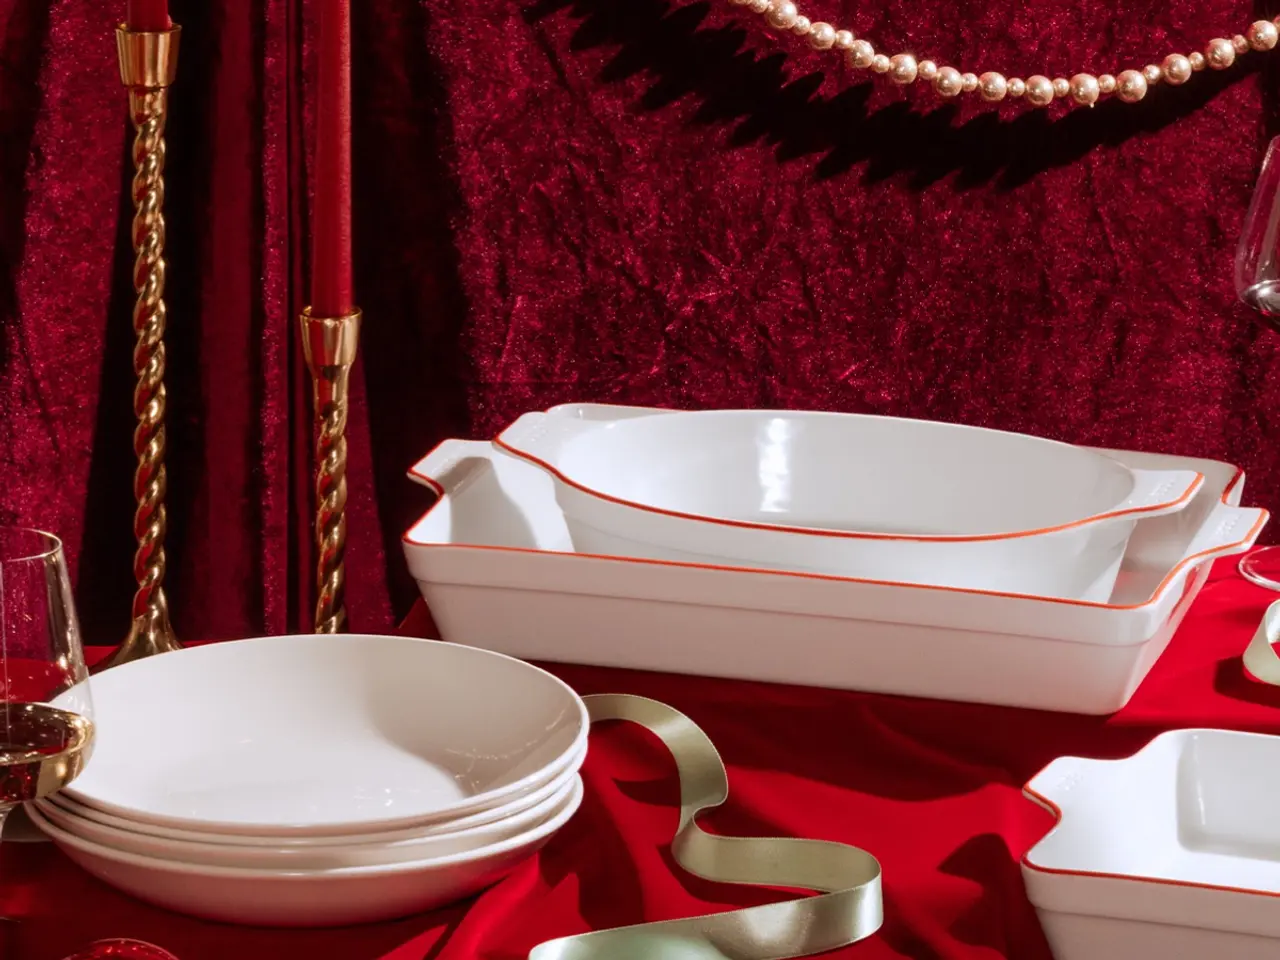 A luxurious table setting featuring white dishes with gold trim, elegant glassware, and golden accents on a red velvet cloth.